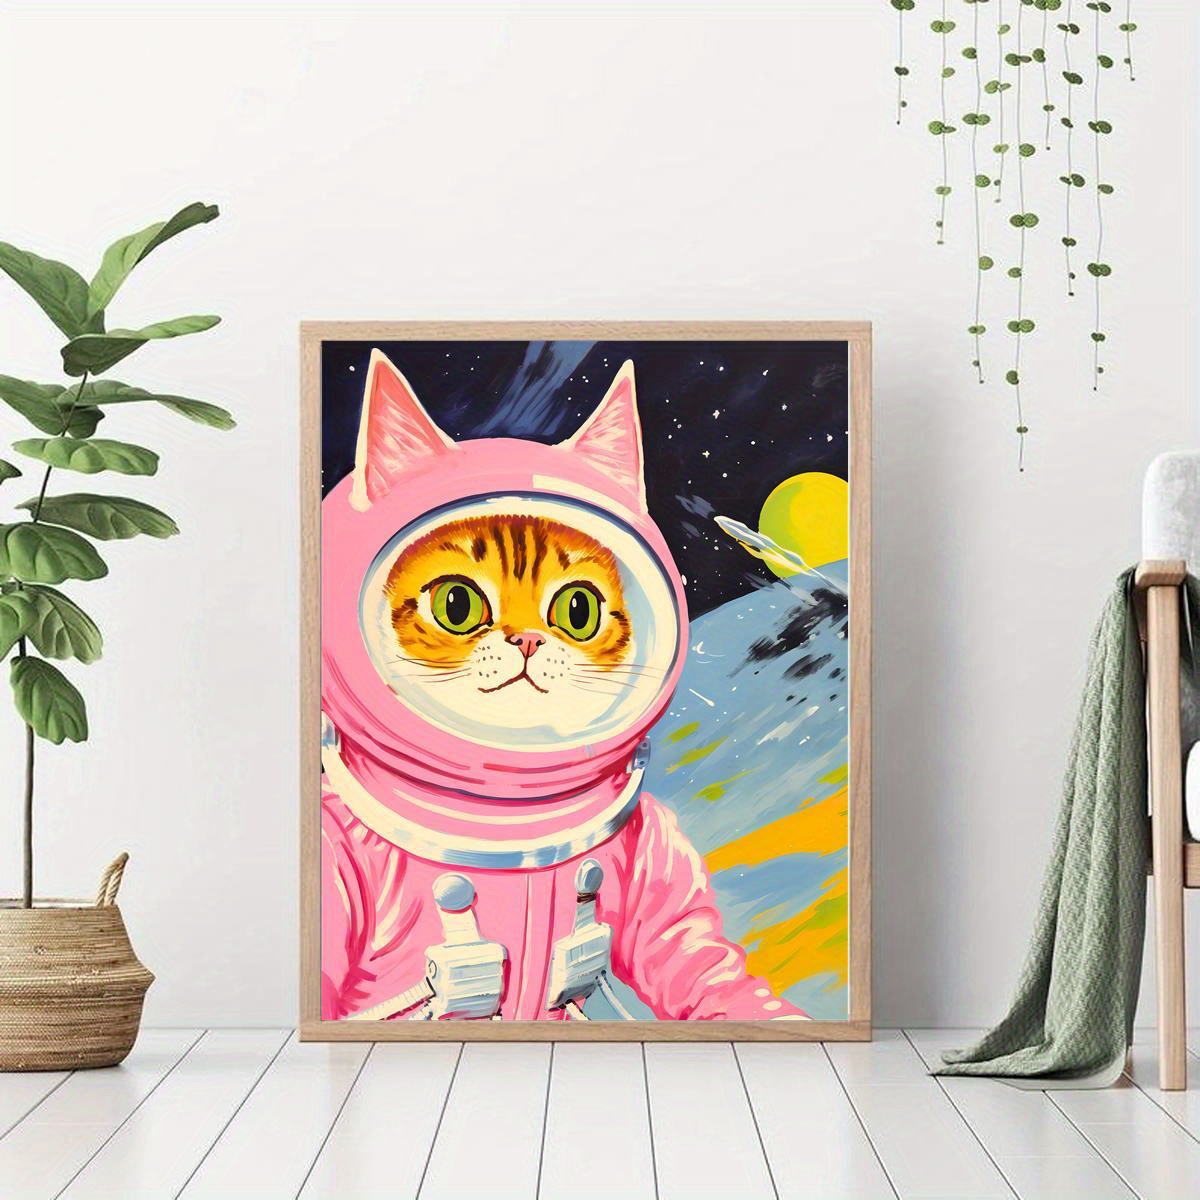 

Charming Pink Cat Astronaut Canvas Art Print - Whimsical Space-themed Wall Decor For Living Room, Bedroom & Home Office - Unframed Modern/classic Style Cat Decor Leopard Print Room Decor